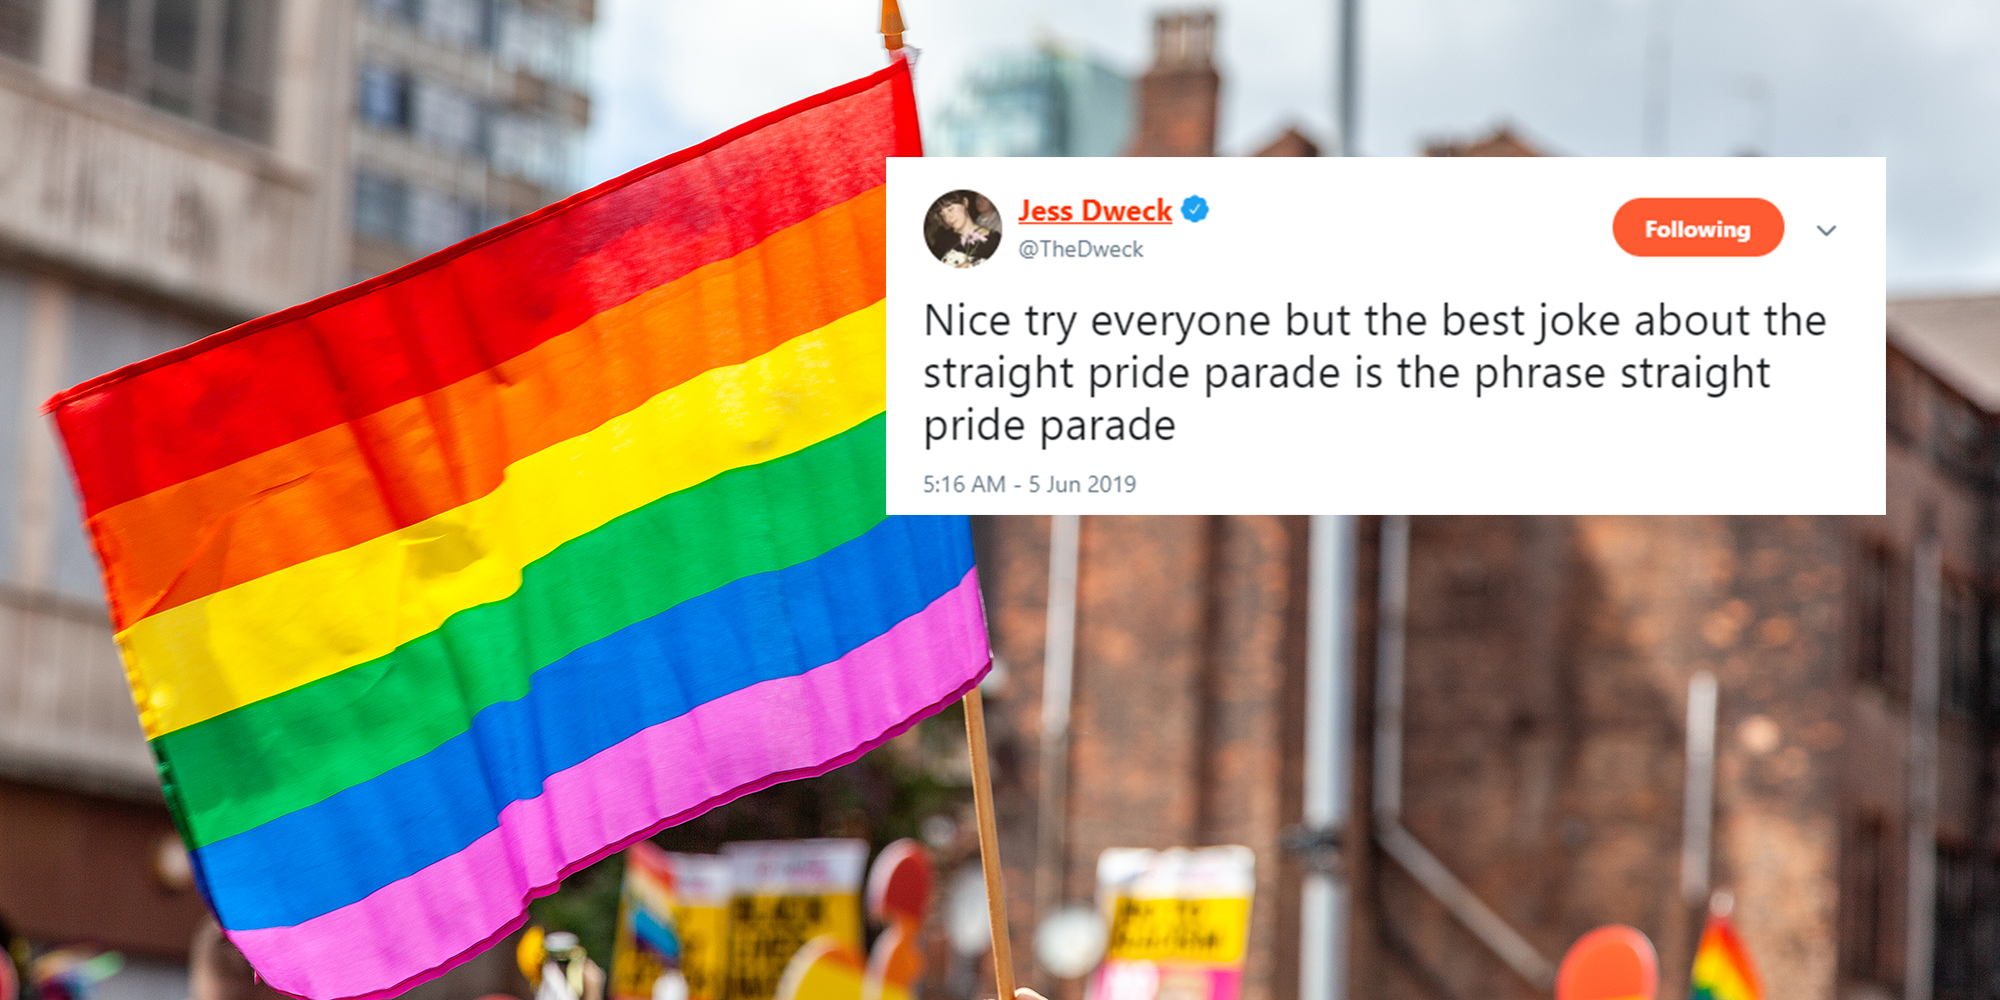 Twitter mocked the concept of a straight pride parade, rightfully — but we should also engage with why these men want to see such a 'counterprotest' happen in the first place